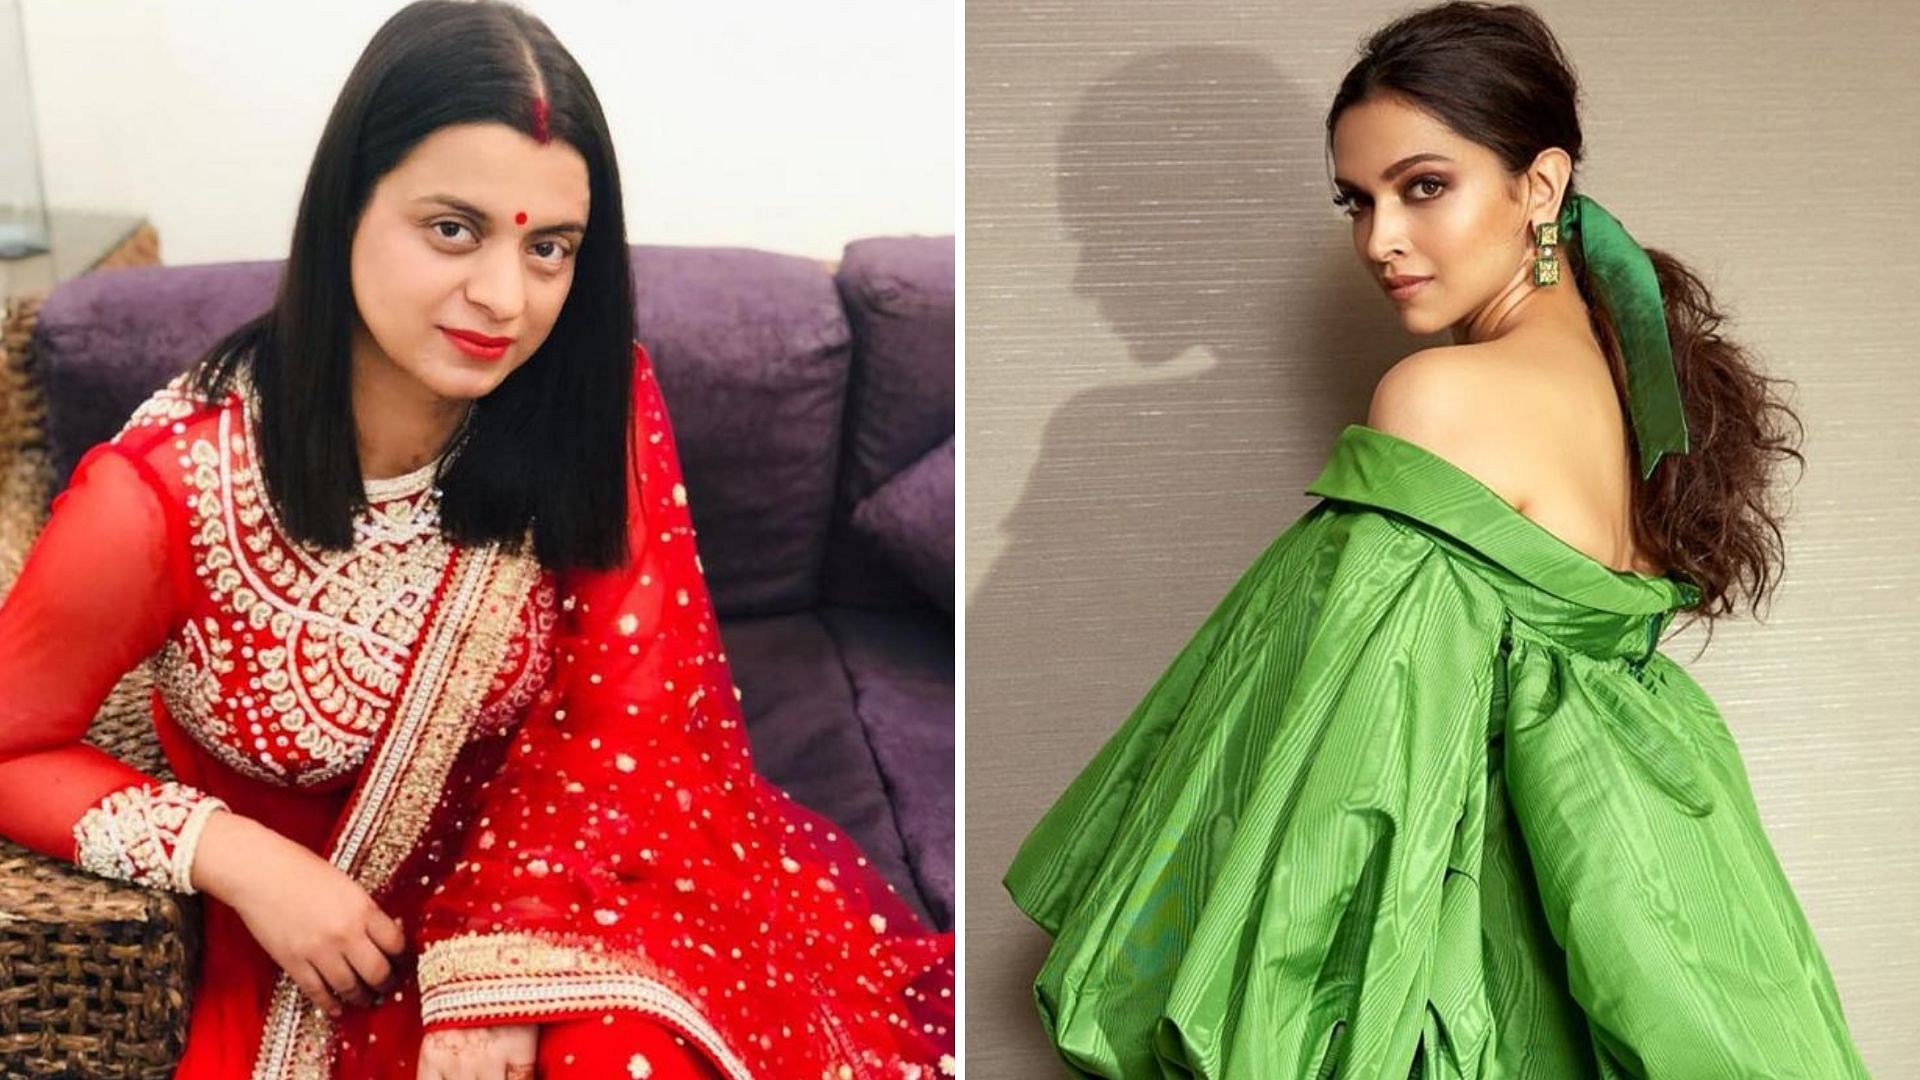 Rangoli Chandel has alleged that&nbsp;Deepika Padukone’s The Live Love Laugh Foundation trivialised depression in a social media post.